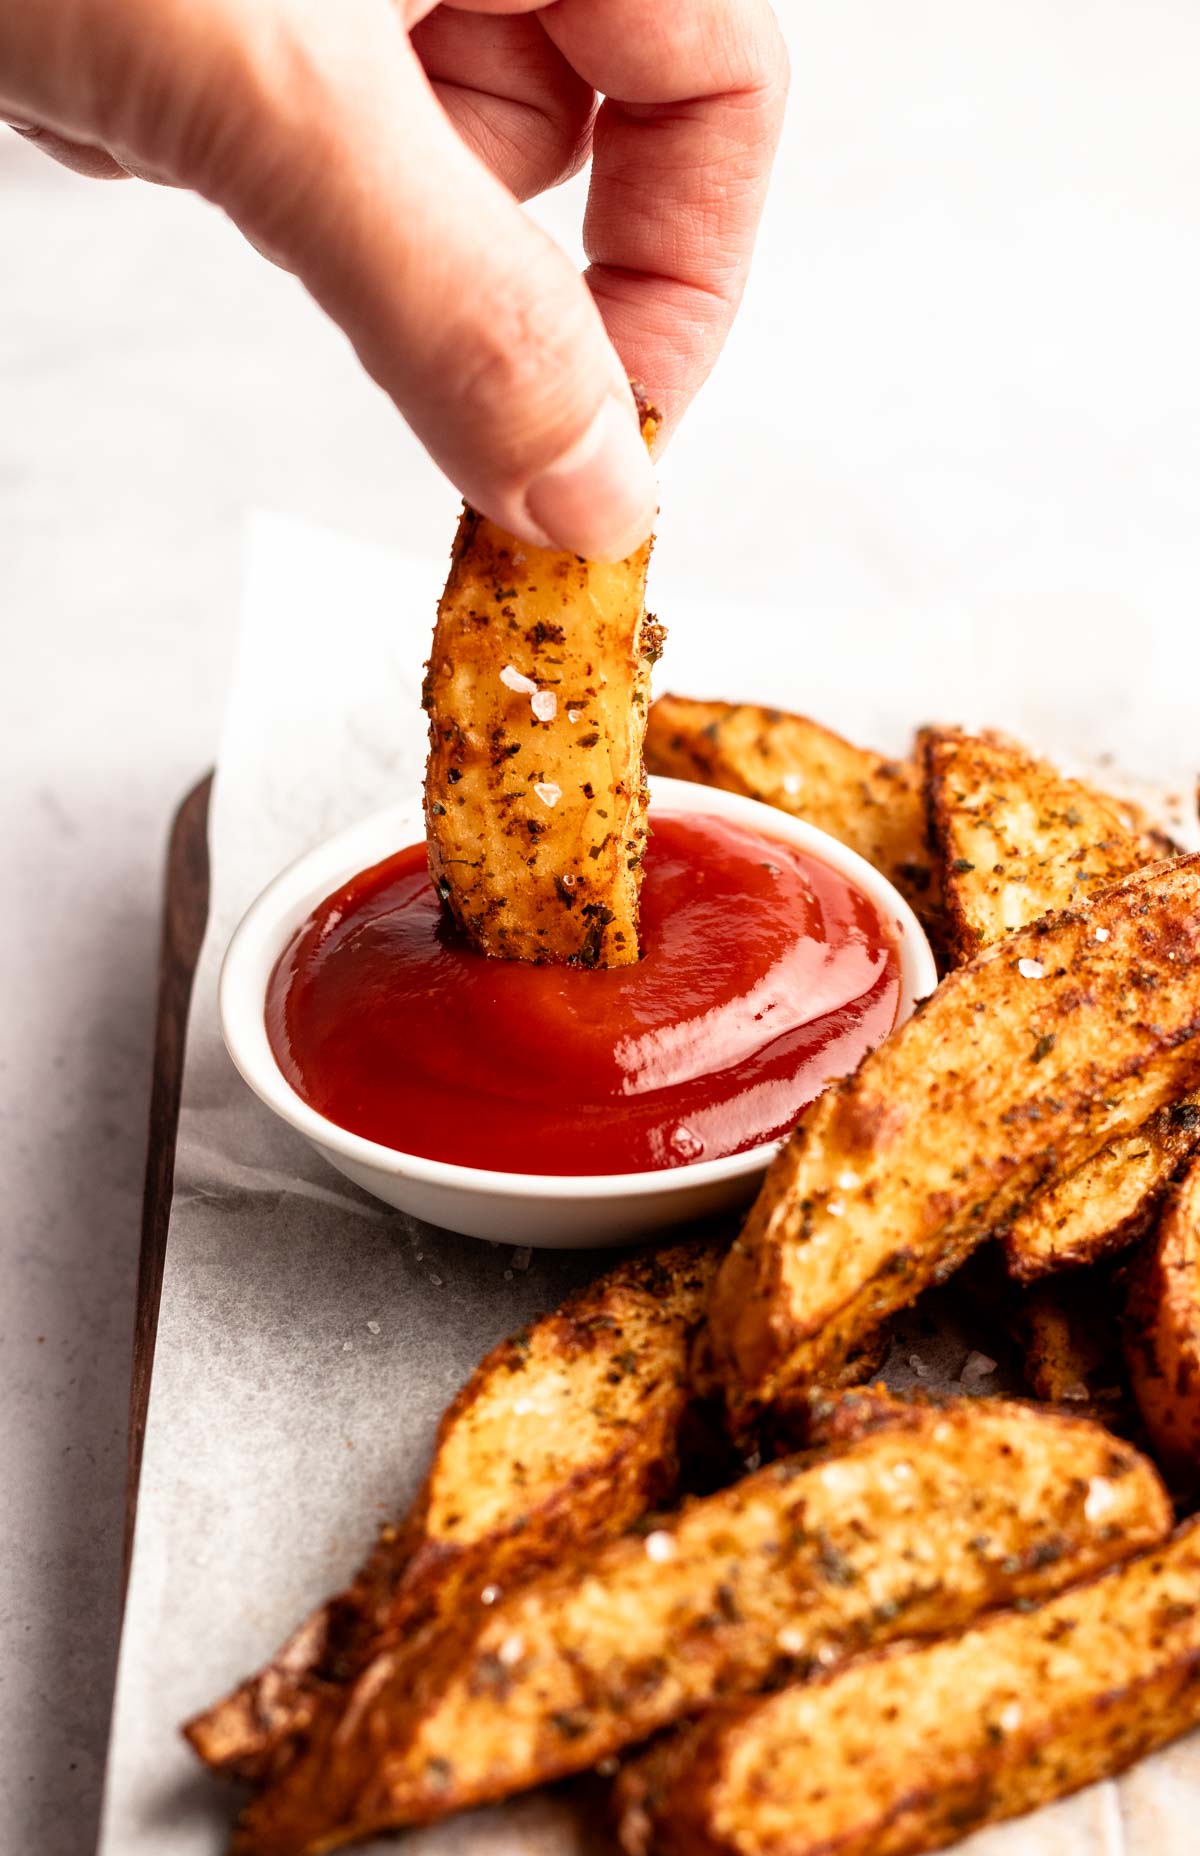 Piece of potato dipped in ketchup.